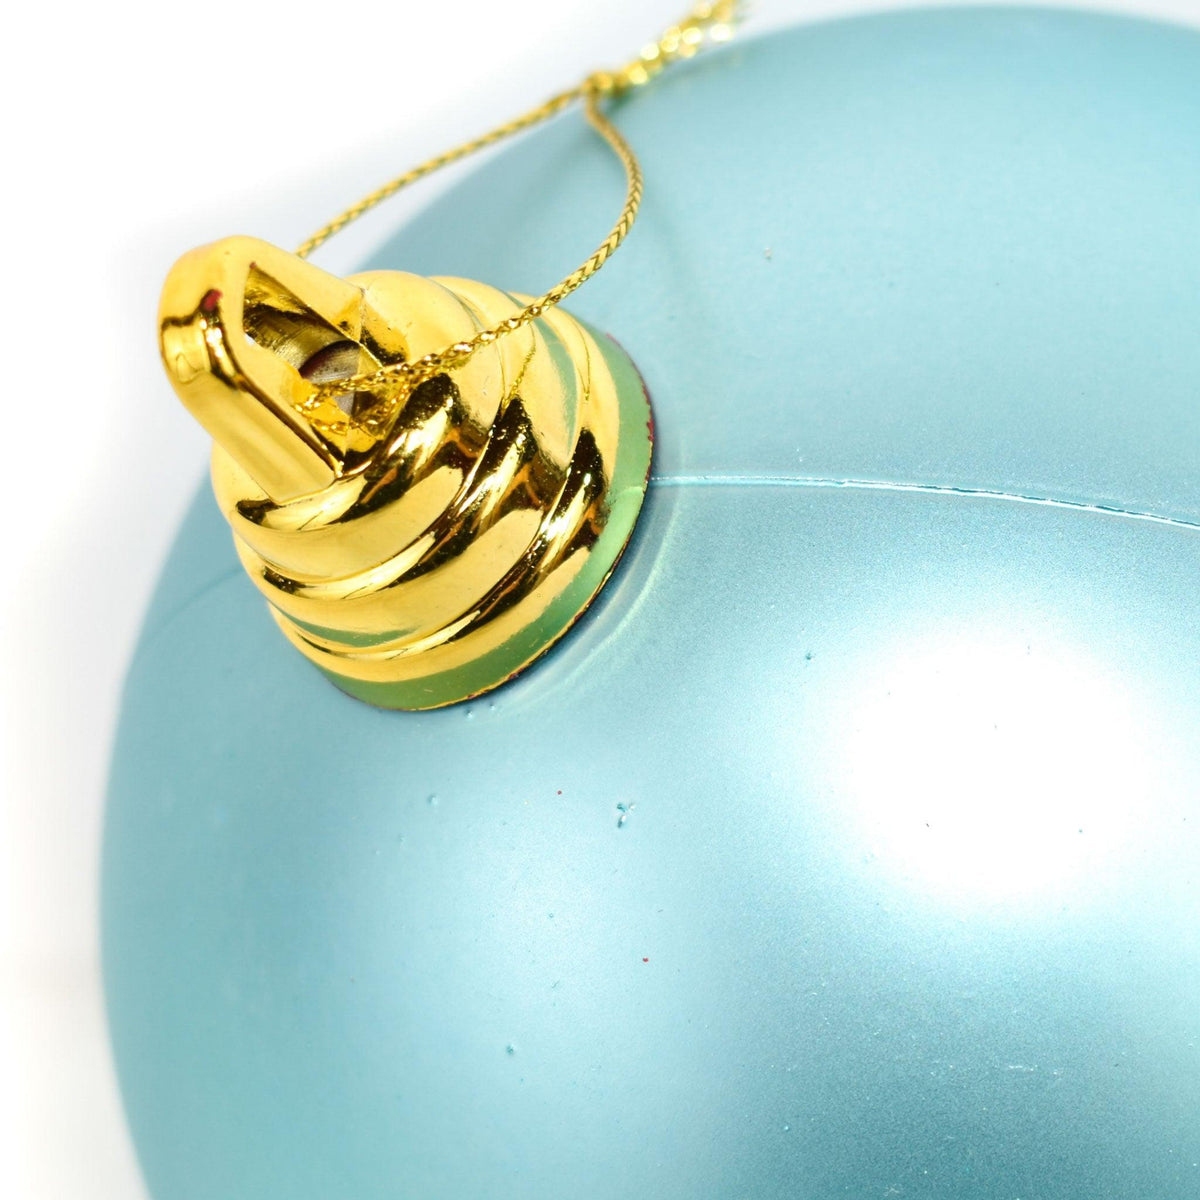 Lee Display offers brand new Shiny Matte Teal Plastic Ball Ornaments at wholesale prices for affordable Christmas Tree Hanging and Holiday Decorating on sale at leedisplay.com